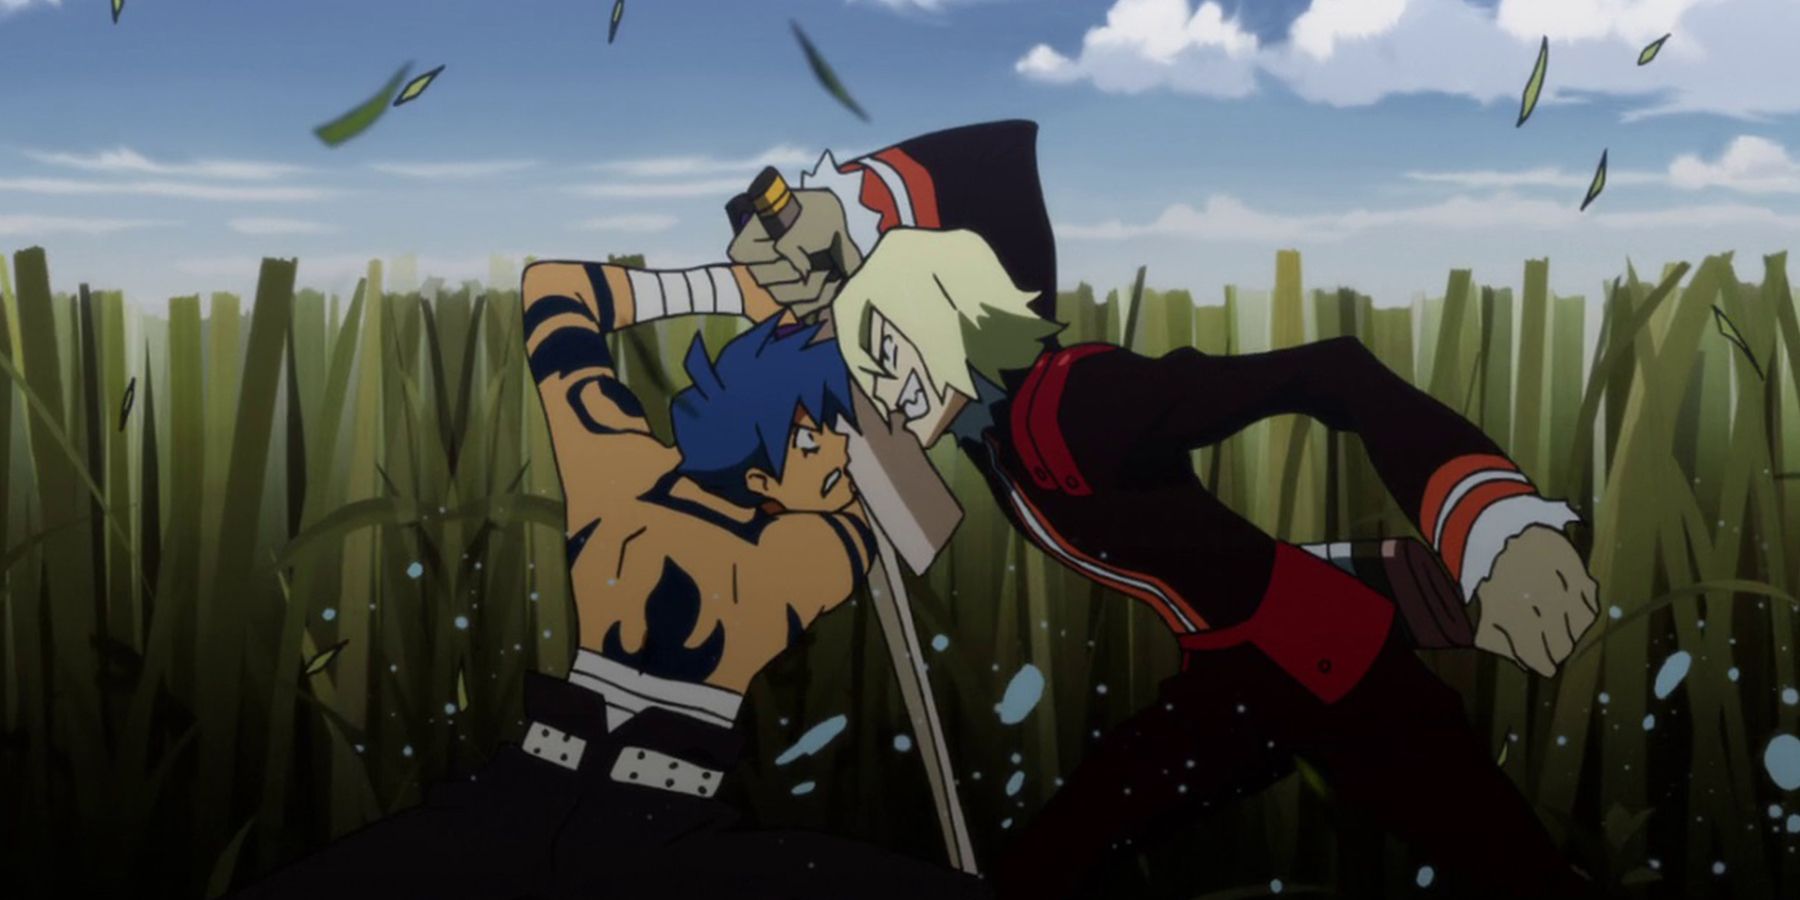 Kamina (left) and Viral (right) clashing blades during the events of Gurren Lagann